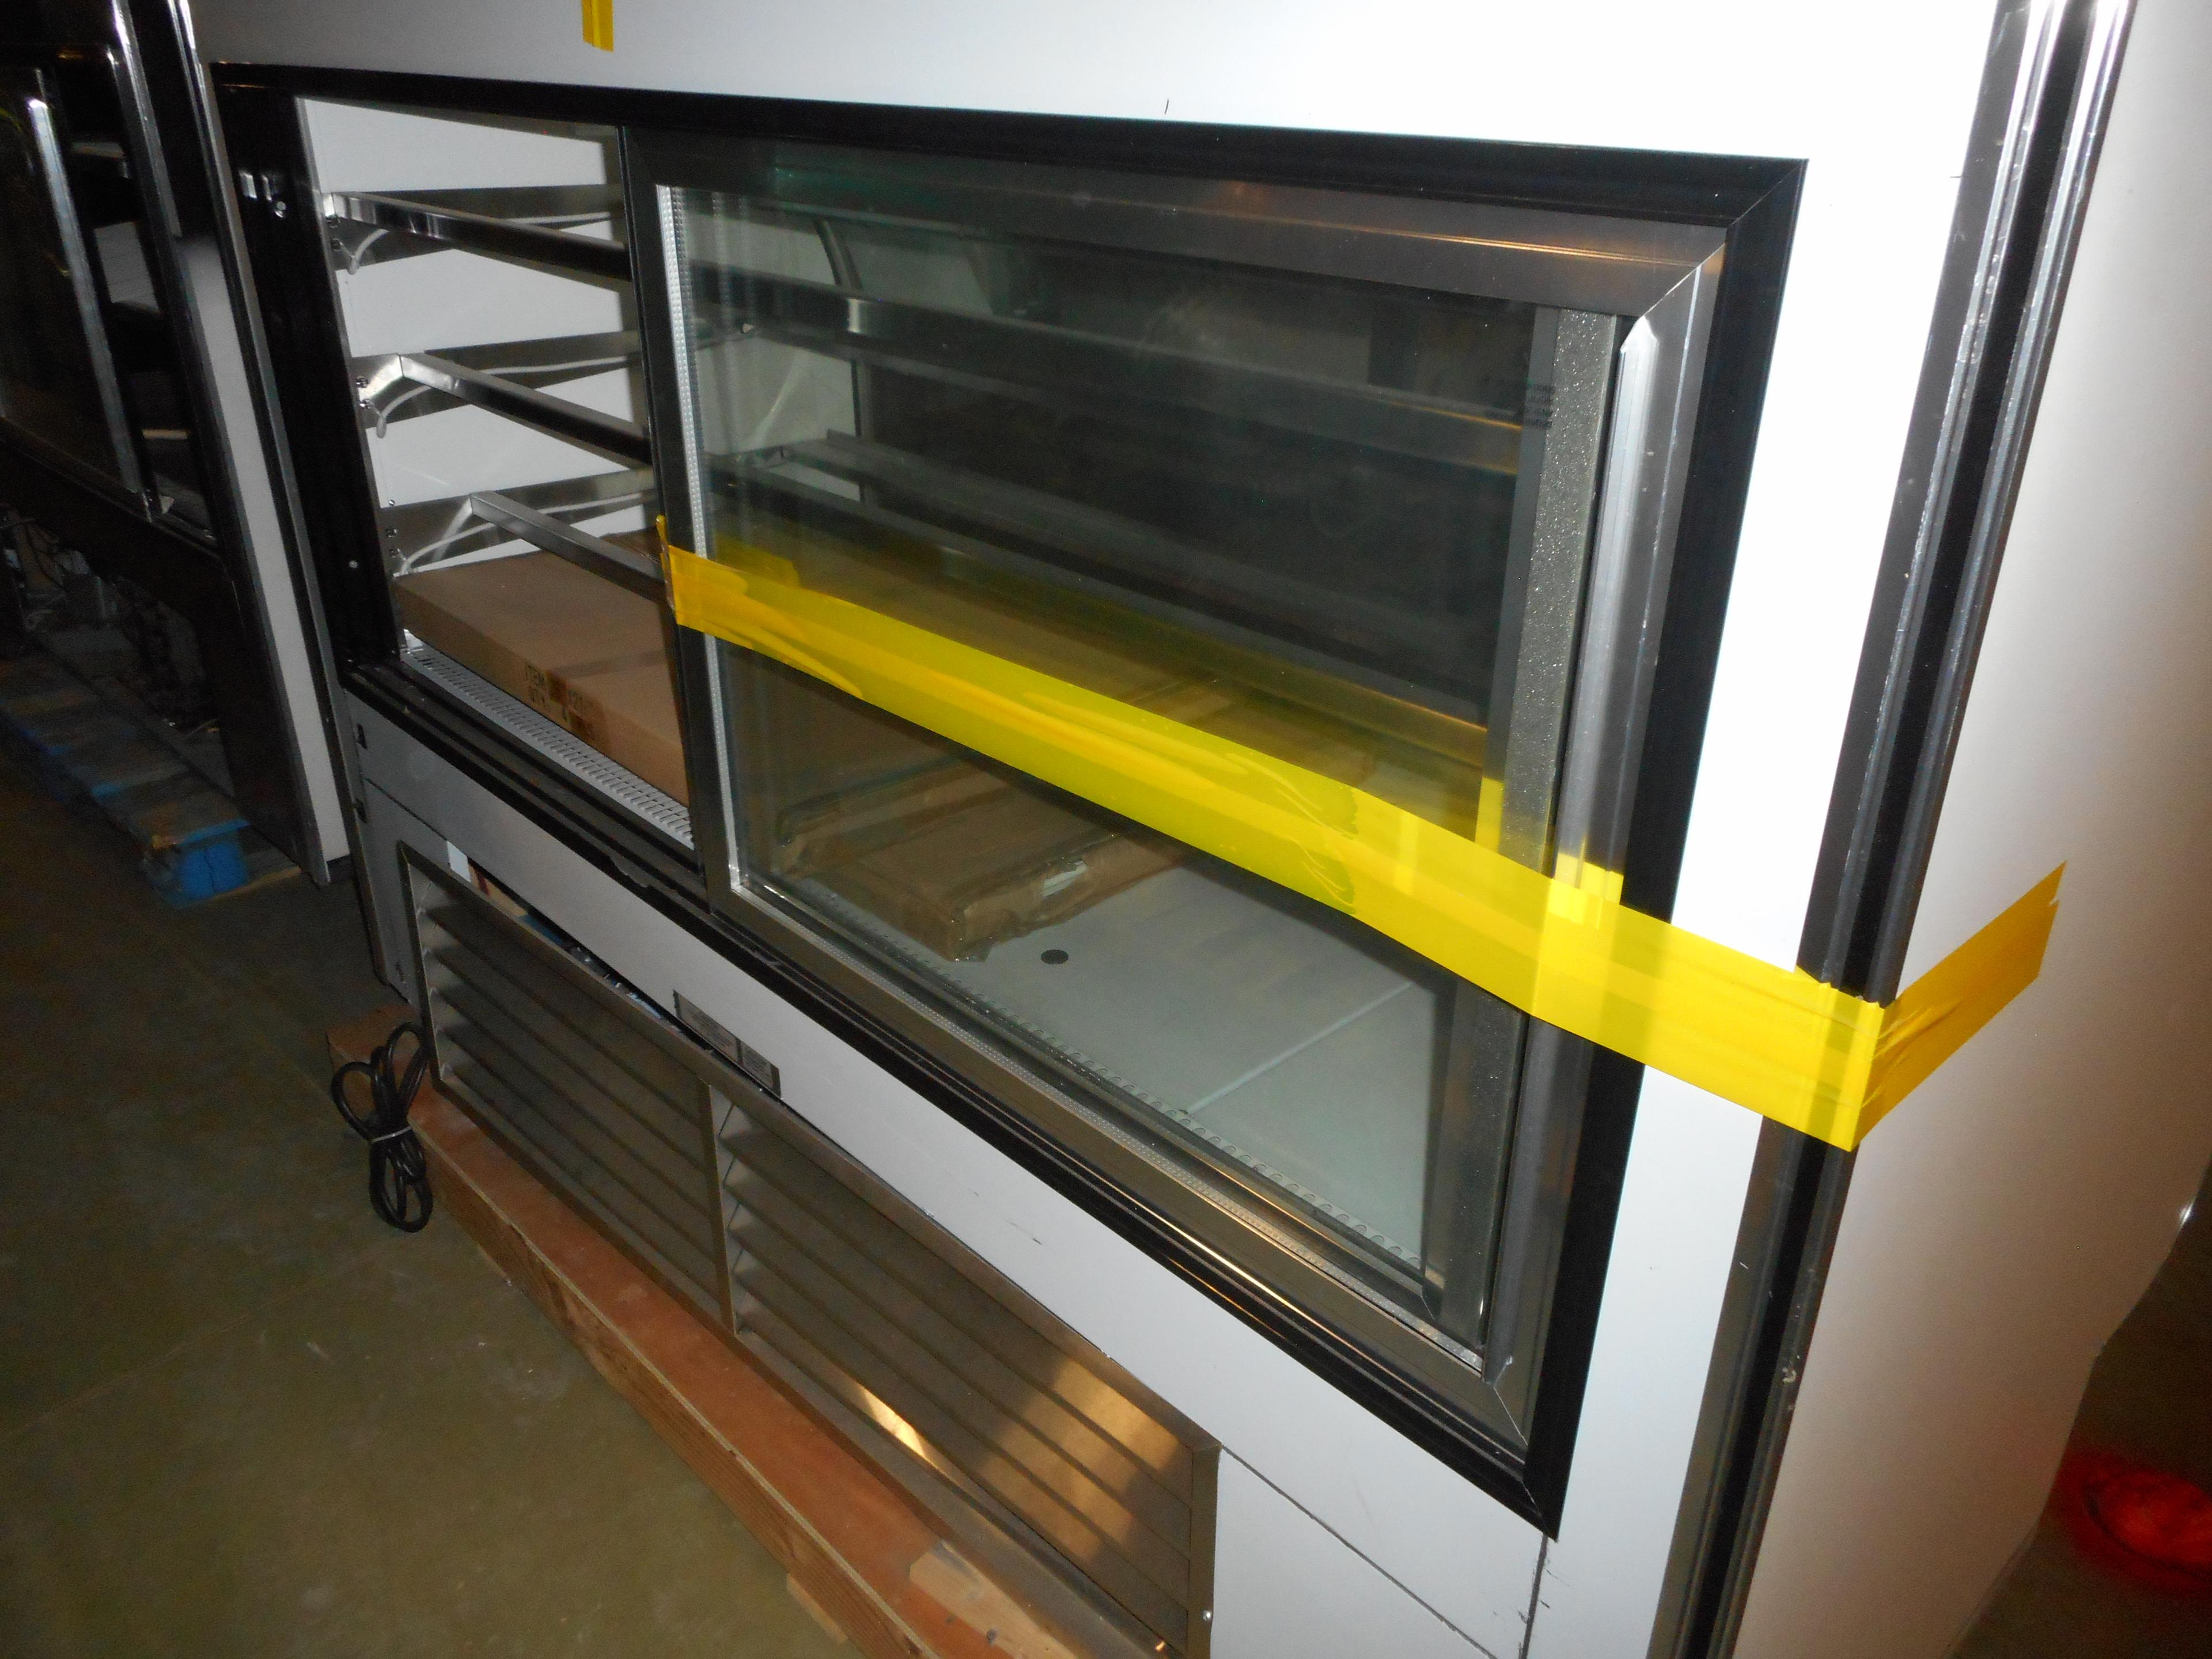 SERVICE BAKERY CASE (NEW NEVER INSTALLED) SELF CONTAINED